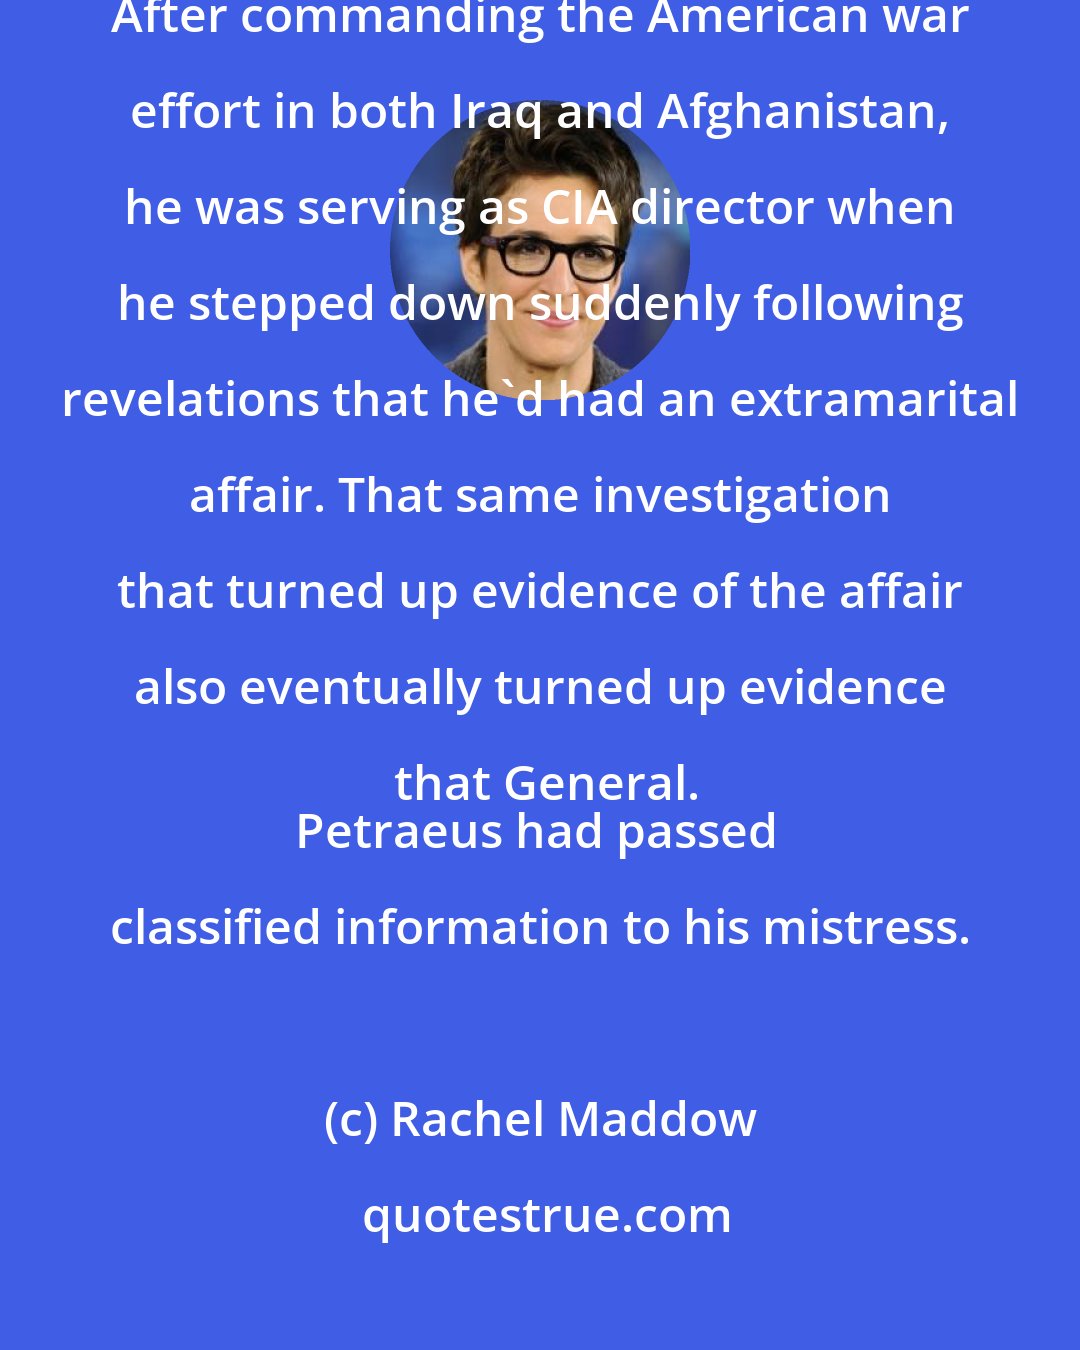 Rachel Maddow: David Petraeus, the best known American general of his generation. After commanding the American war effort in both Iraq and Afghanistan, he was serving as CIA director when he stepped down suddenly following revelations that he`d had an extramarital affair. That same investigation that turned up evidence of the affair also eventually turned up evidence that General.
Petraeus had passed classified information to his mistress.